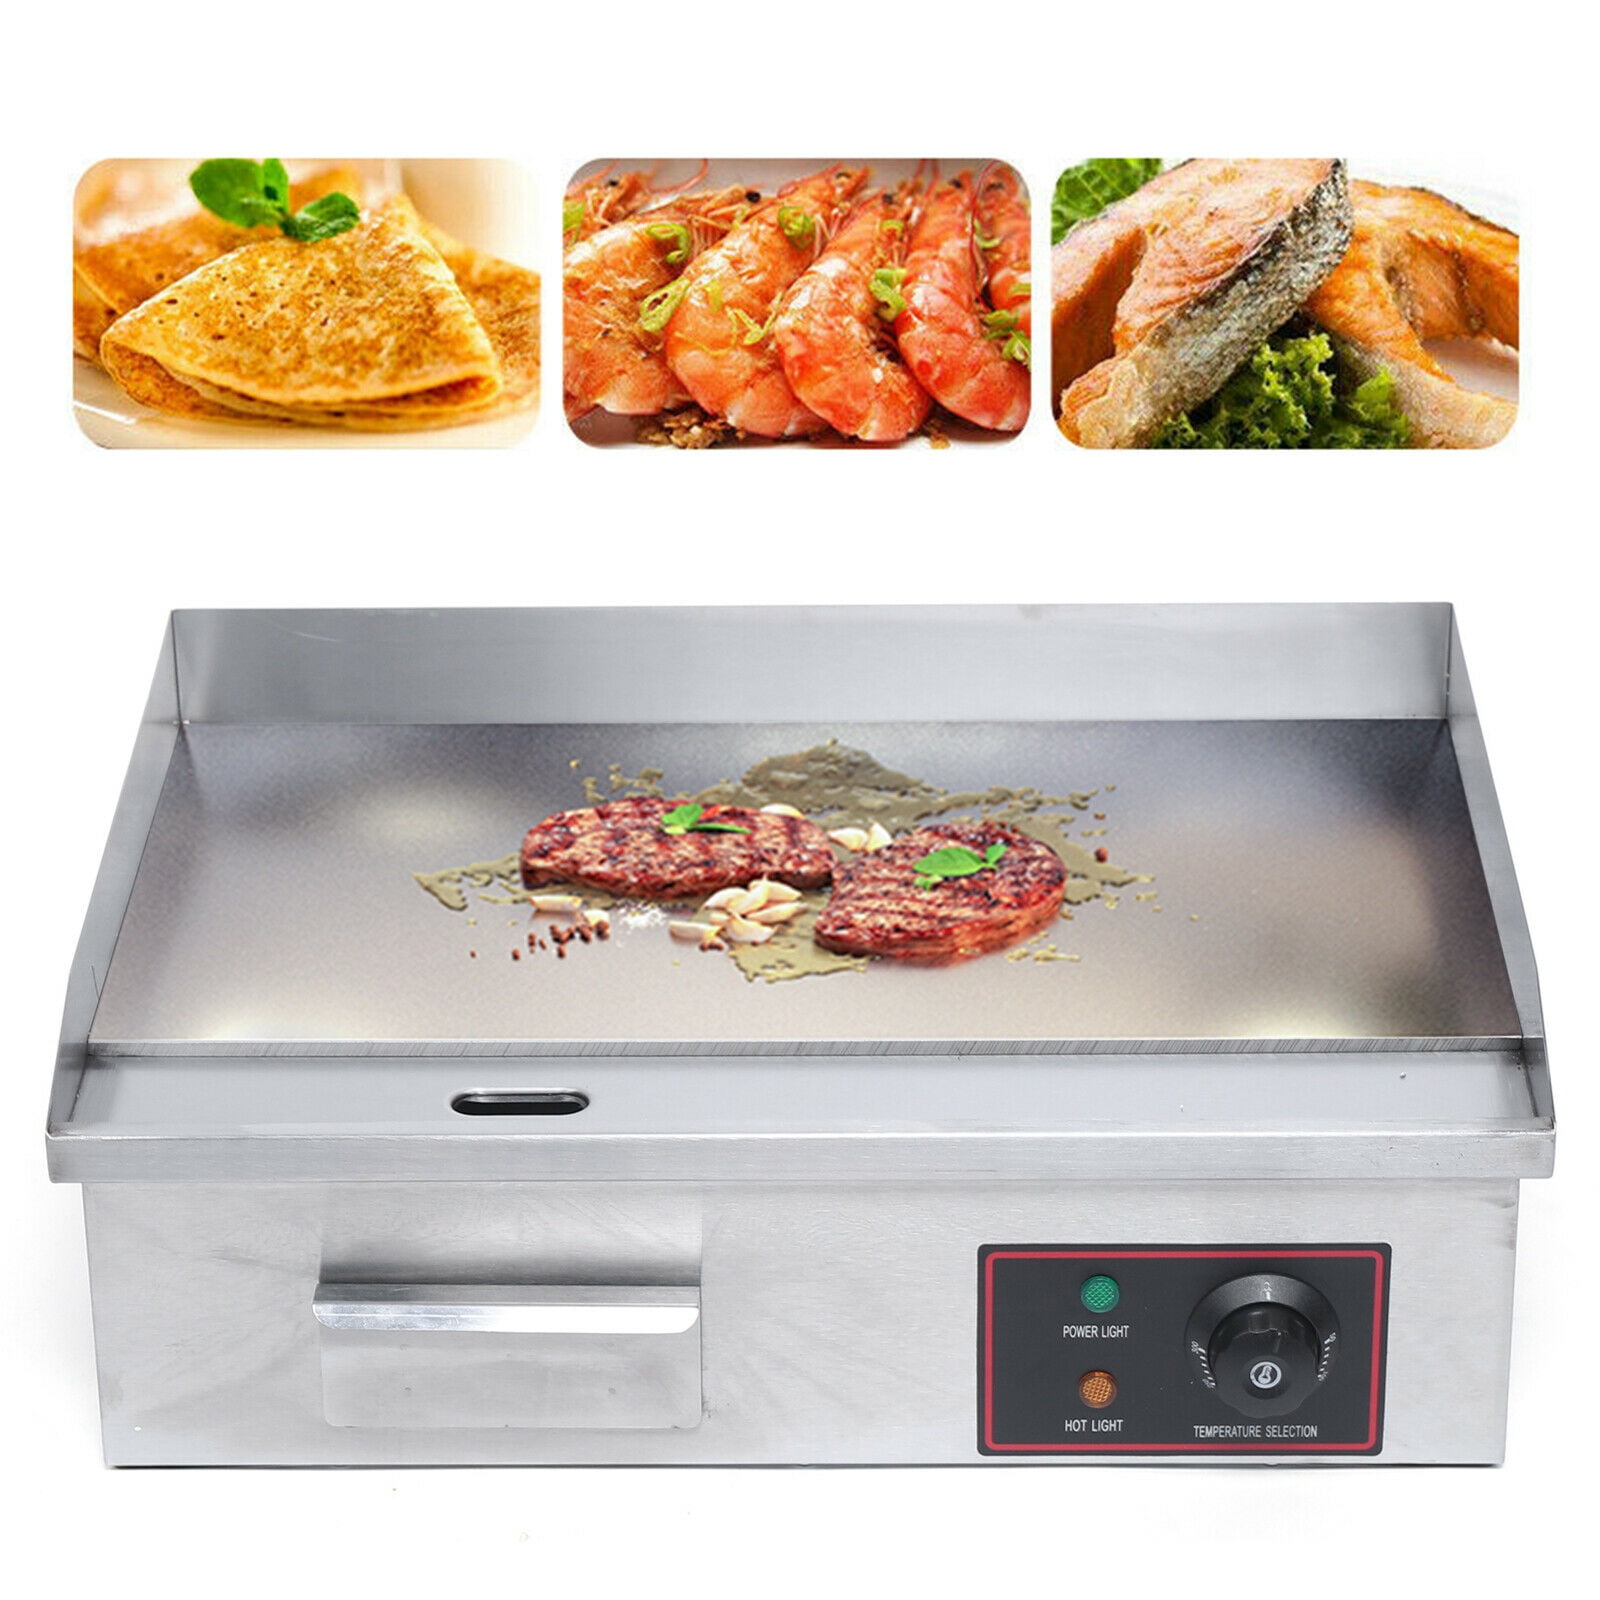 TECHTONGDA Electric Commercial Countertop Griddle Stainless steel Adjustable Temperature Control Restaurant Grill 110V 